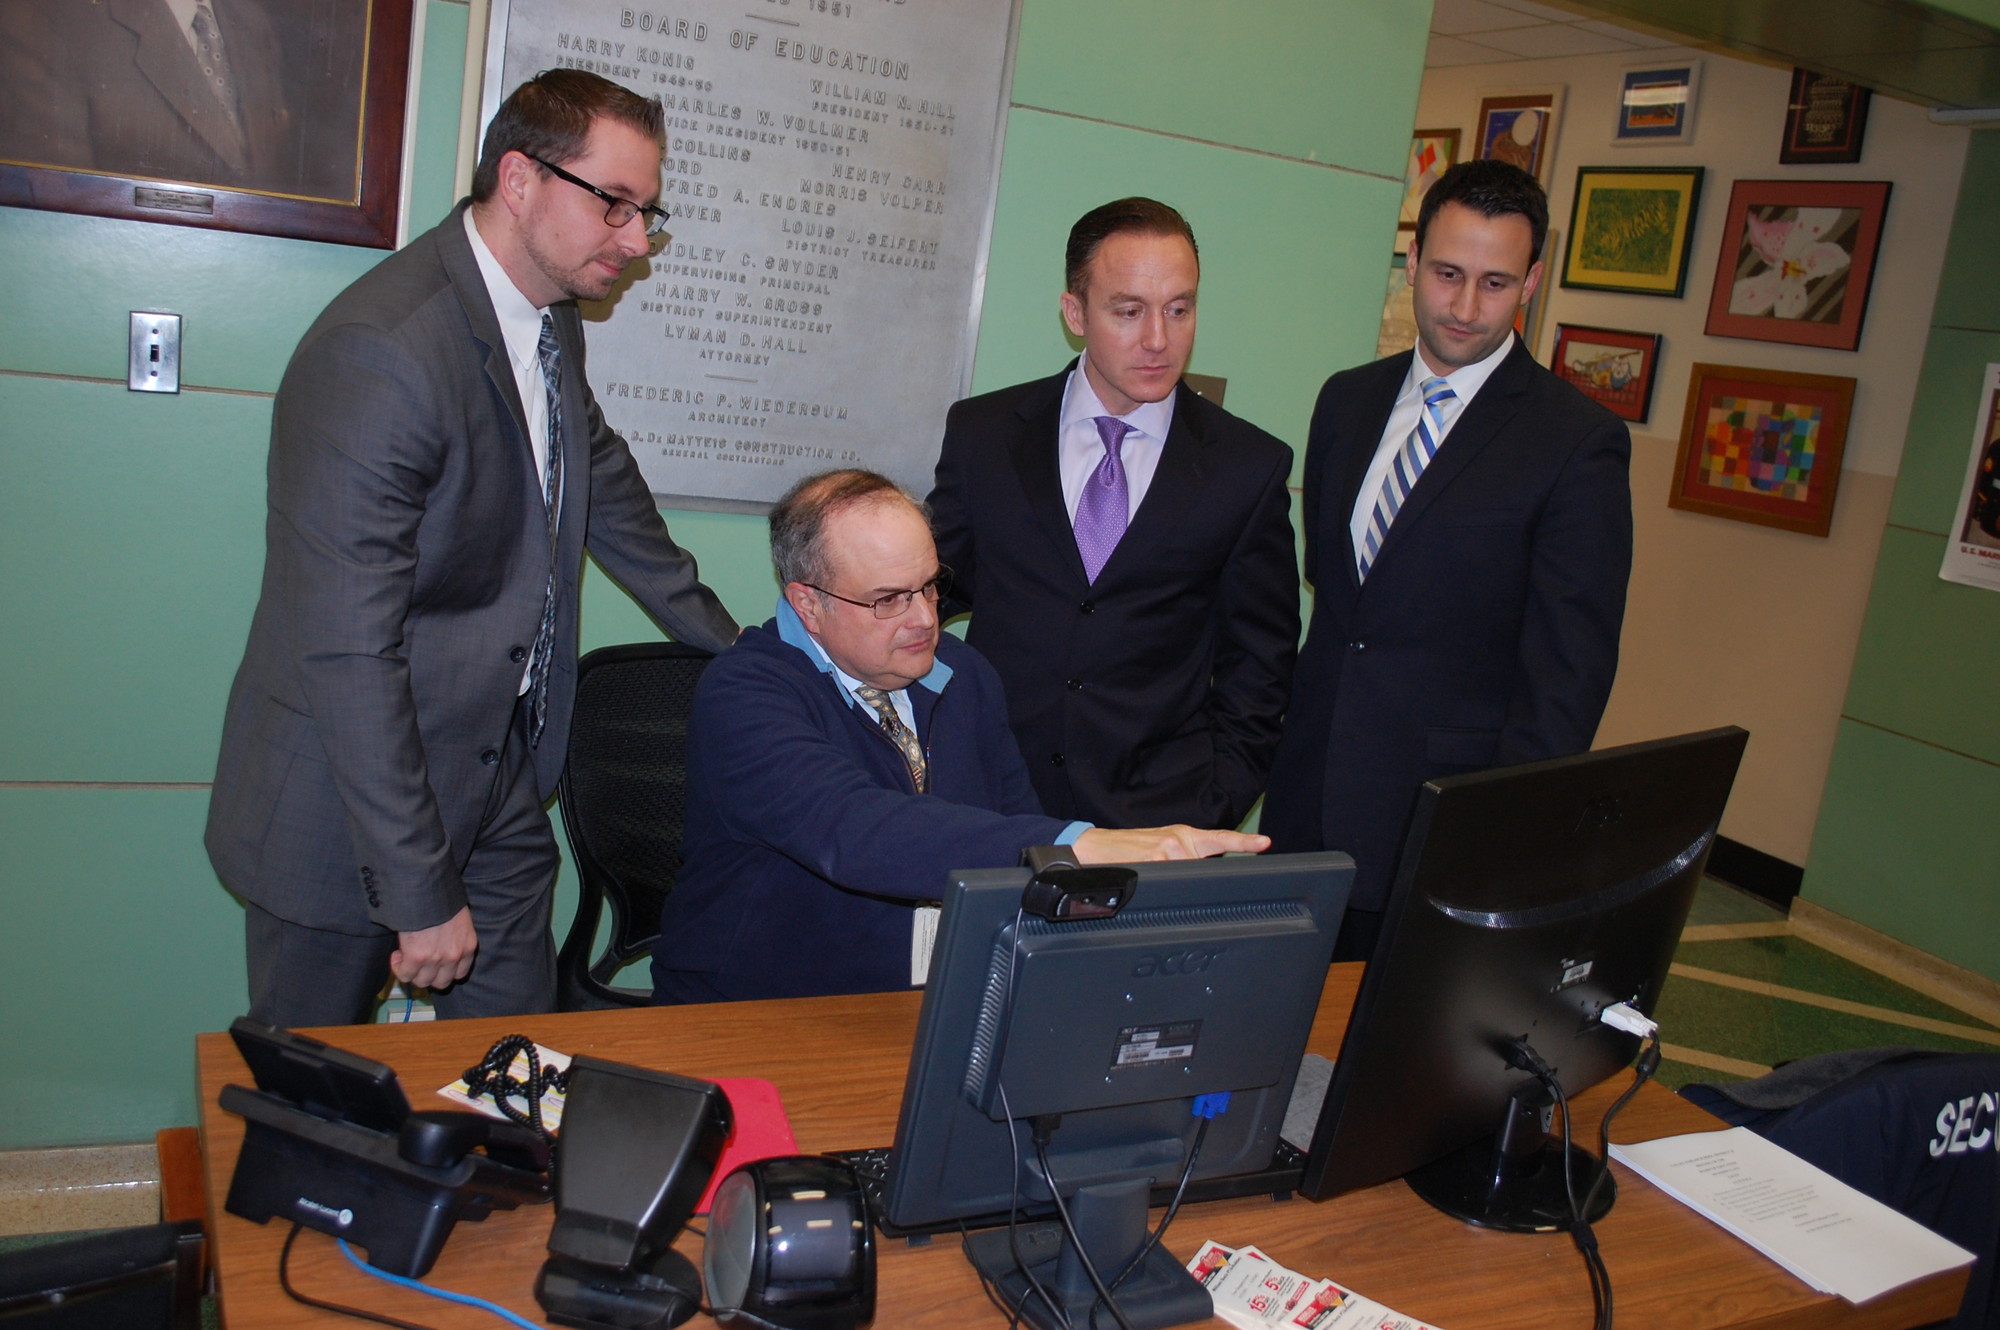 John Venza, one of District 24’s security guards, looked over the new monitoring system at the William L. Buck School with principals, standing from left, Mark Onorato, Dr. Scott Comis and Rosario Iacono, before the Dec. 12 board meeting.